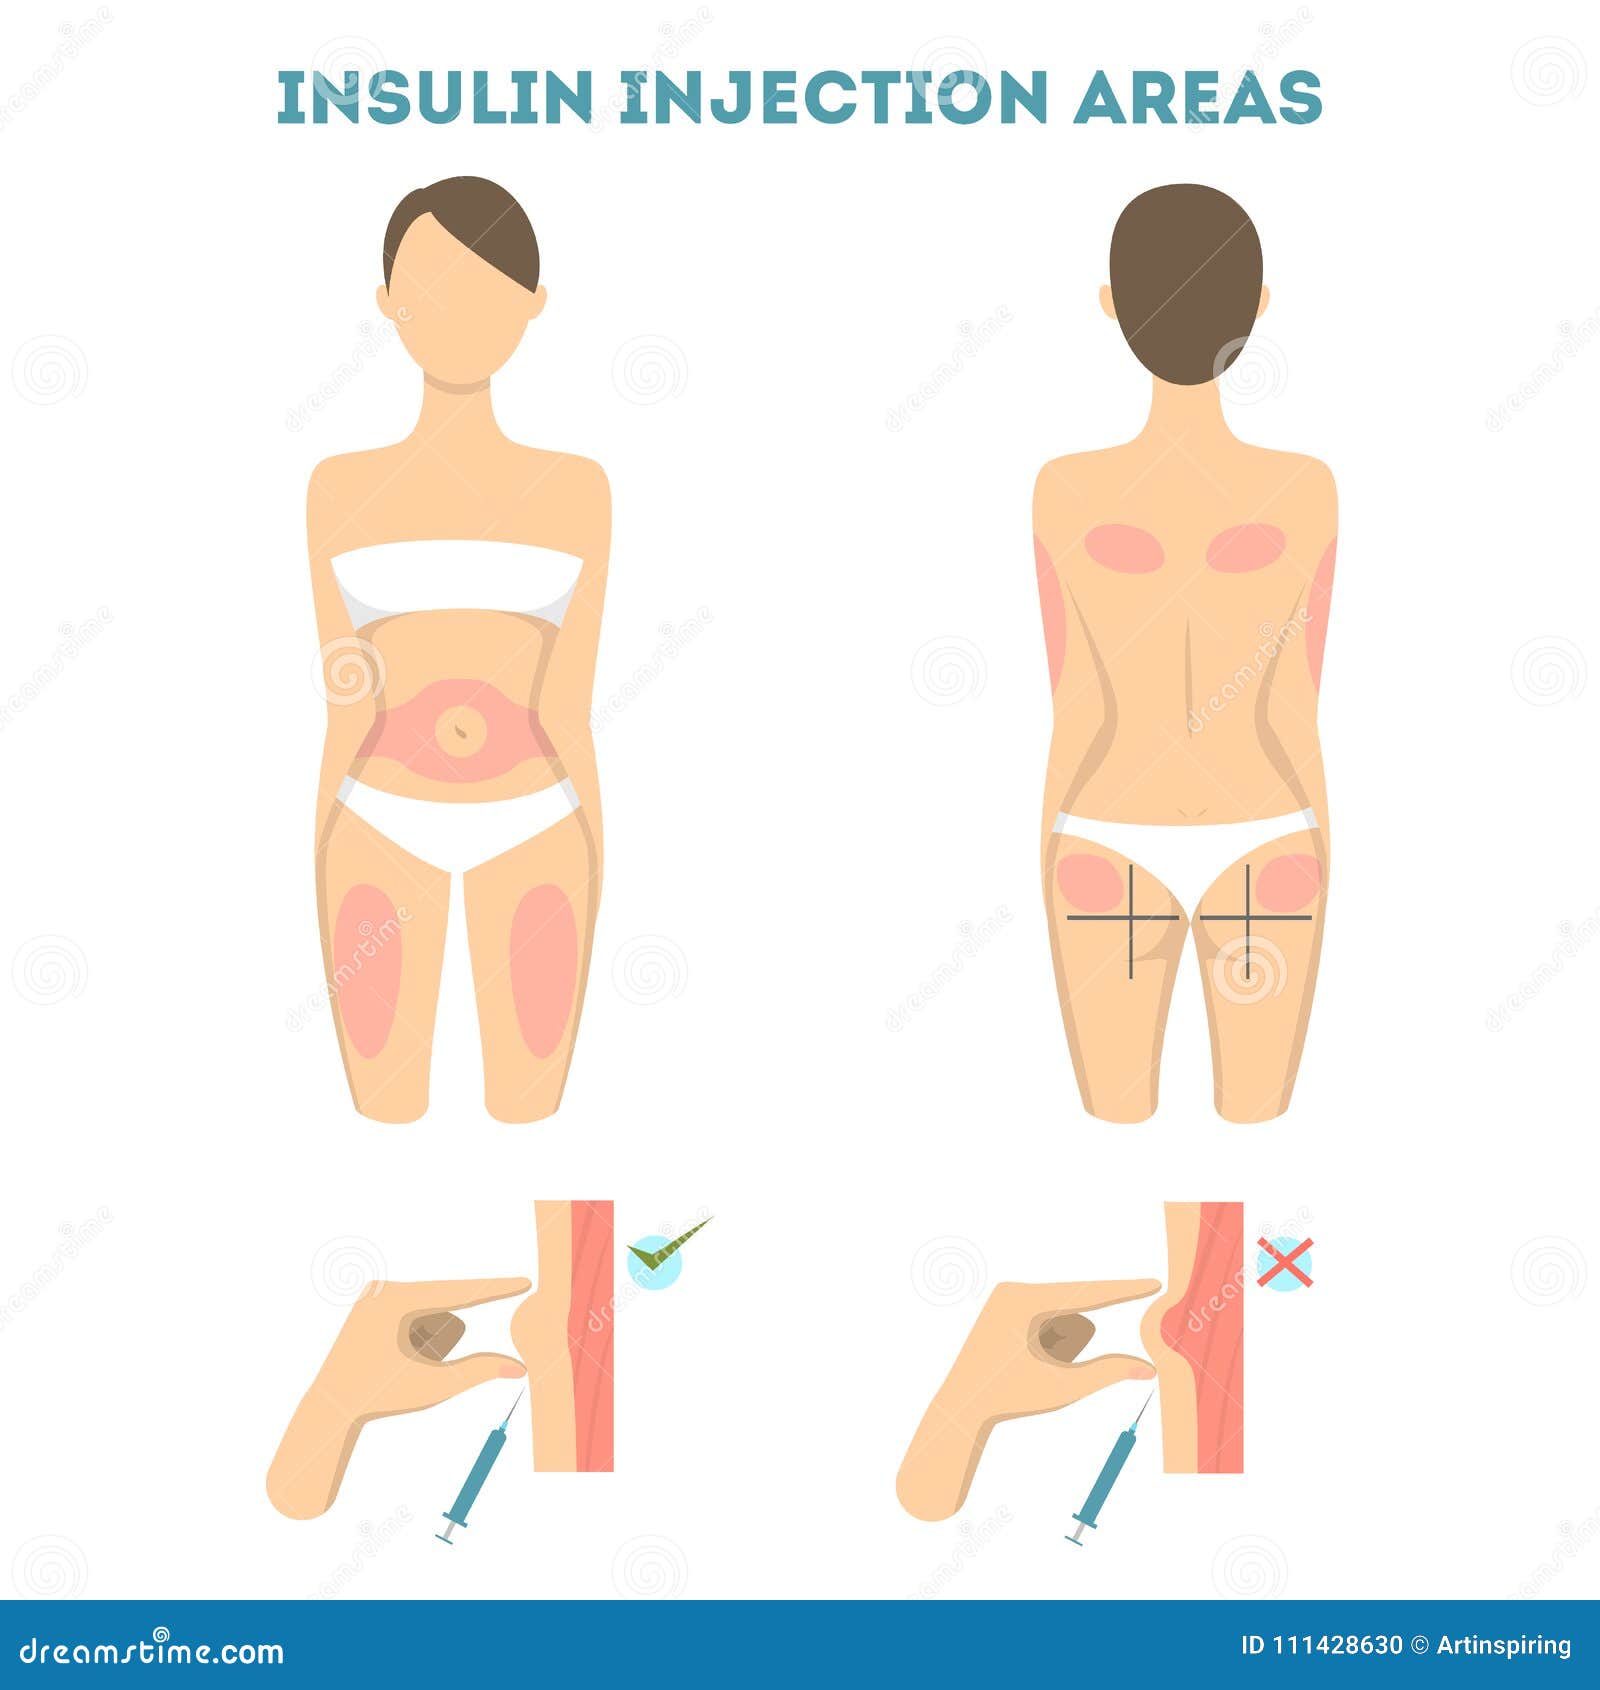 insulin injections places.